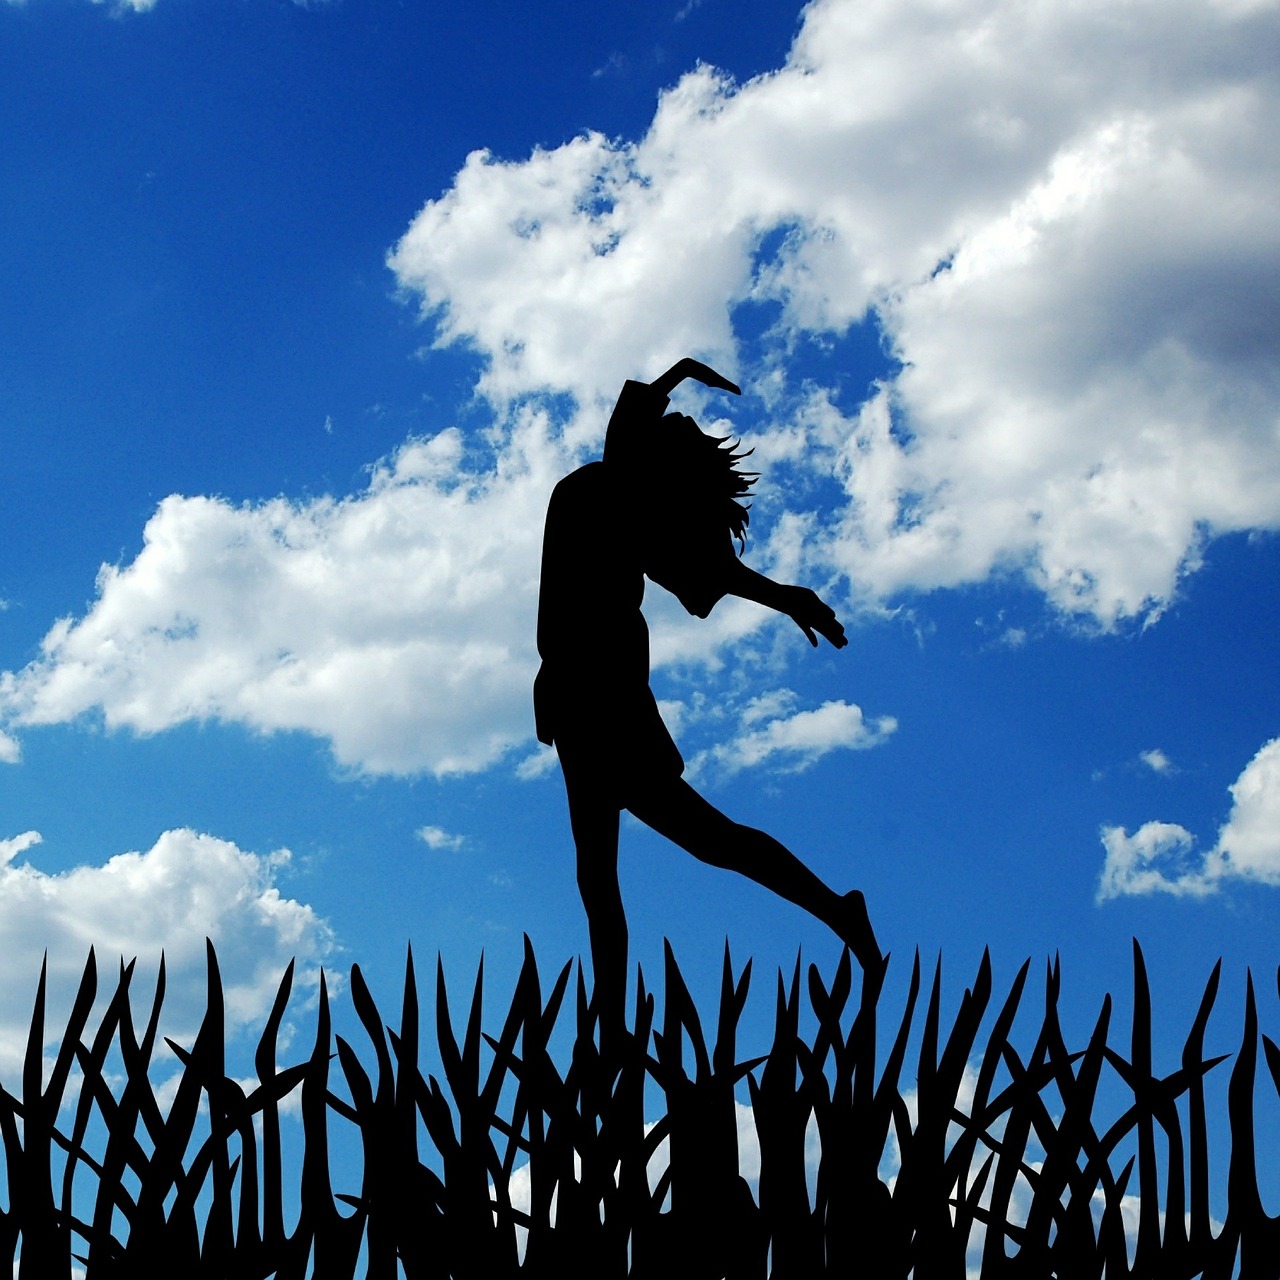 Personal growth. A female silhouette jumping with hands over head set against blue sky with clouds.